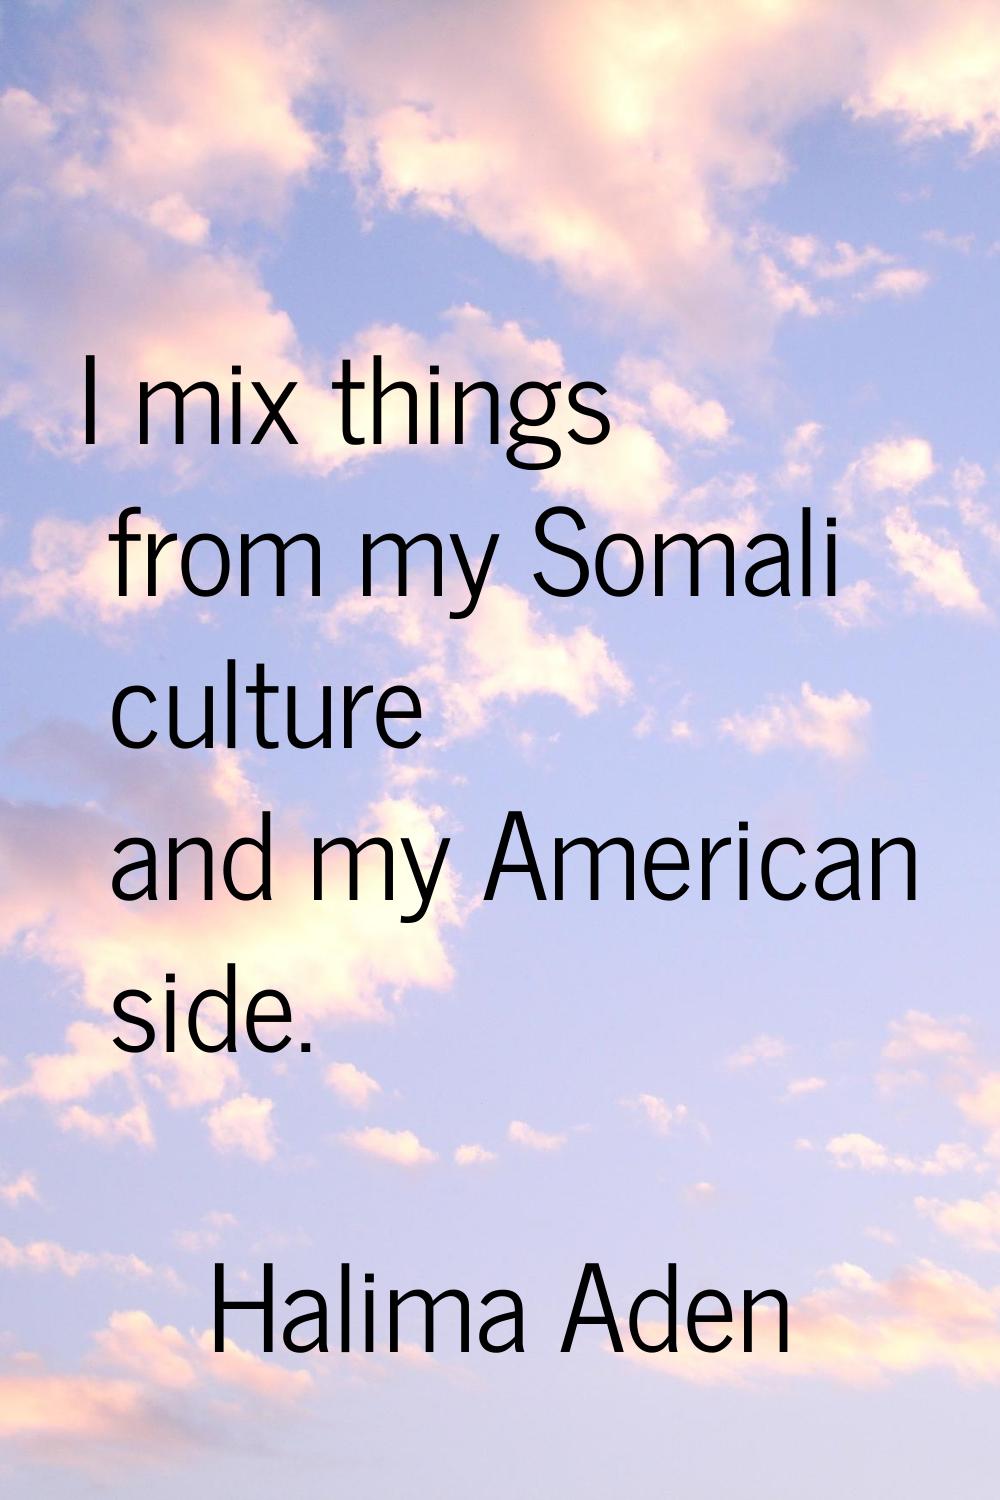 I mix things from my Somali culture and my American side.